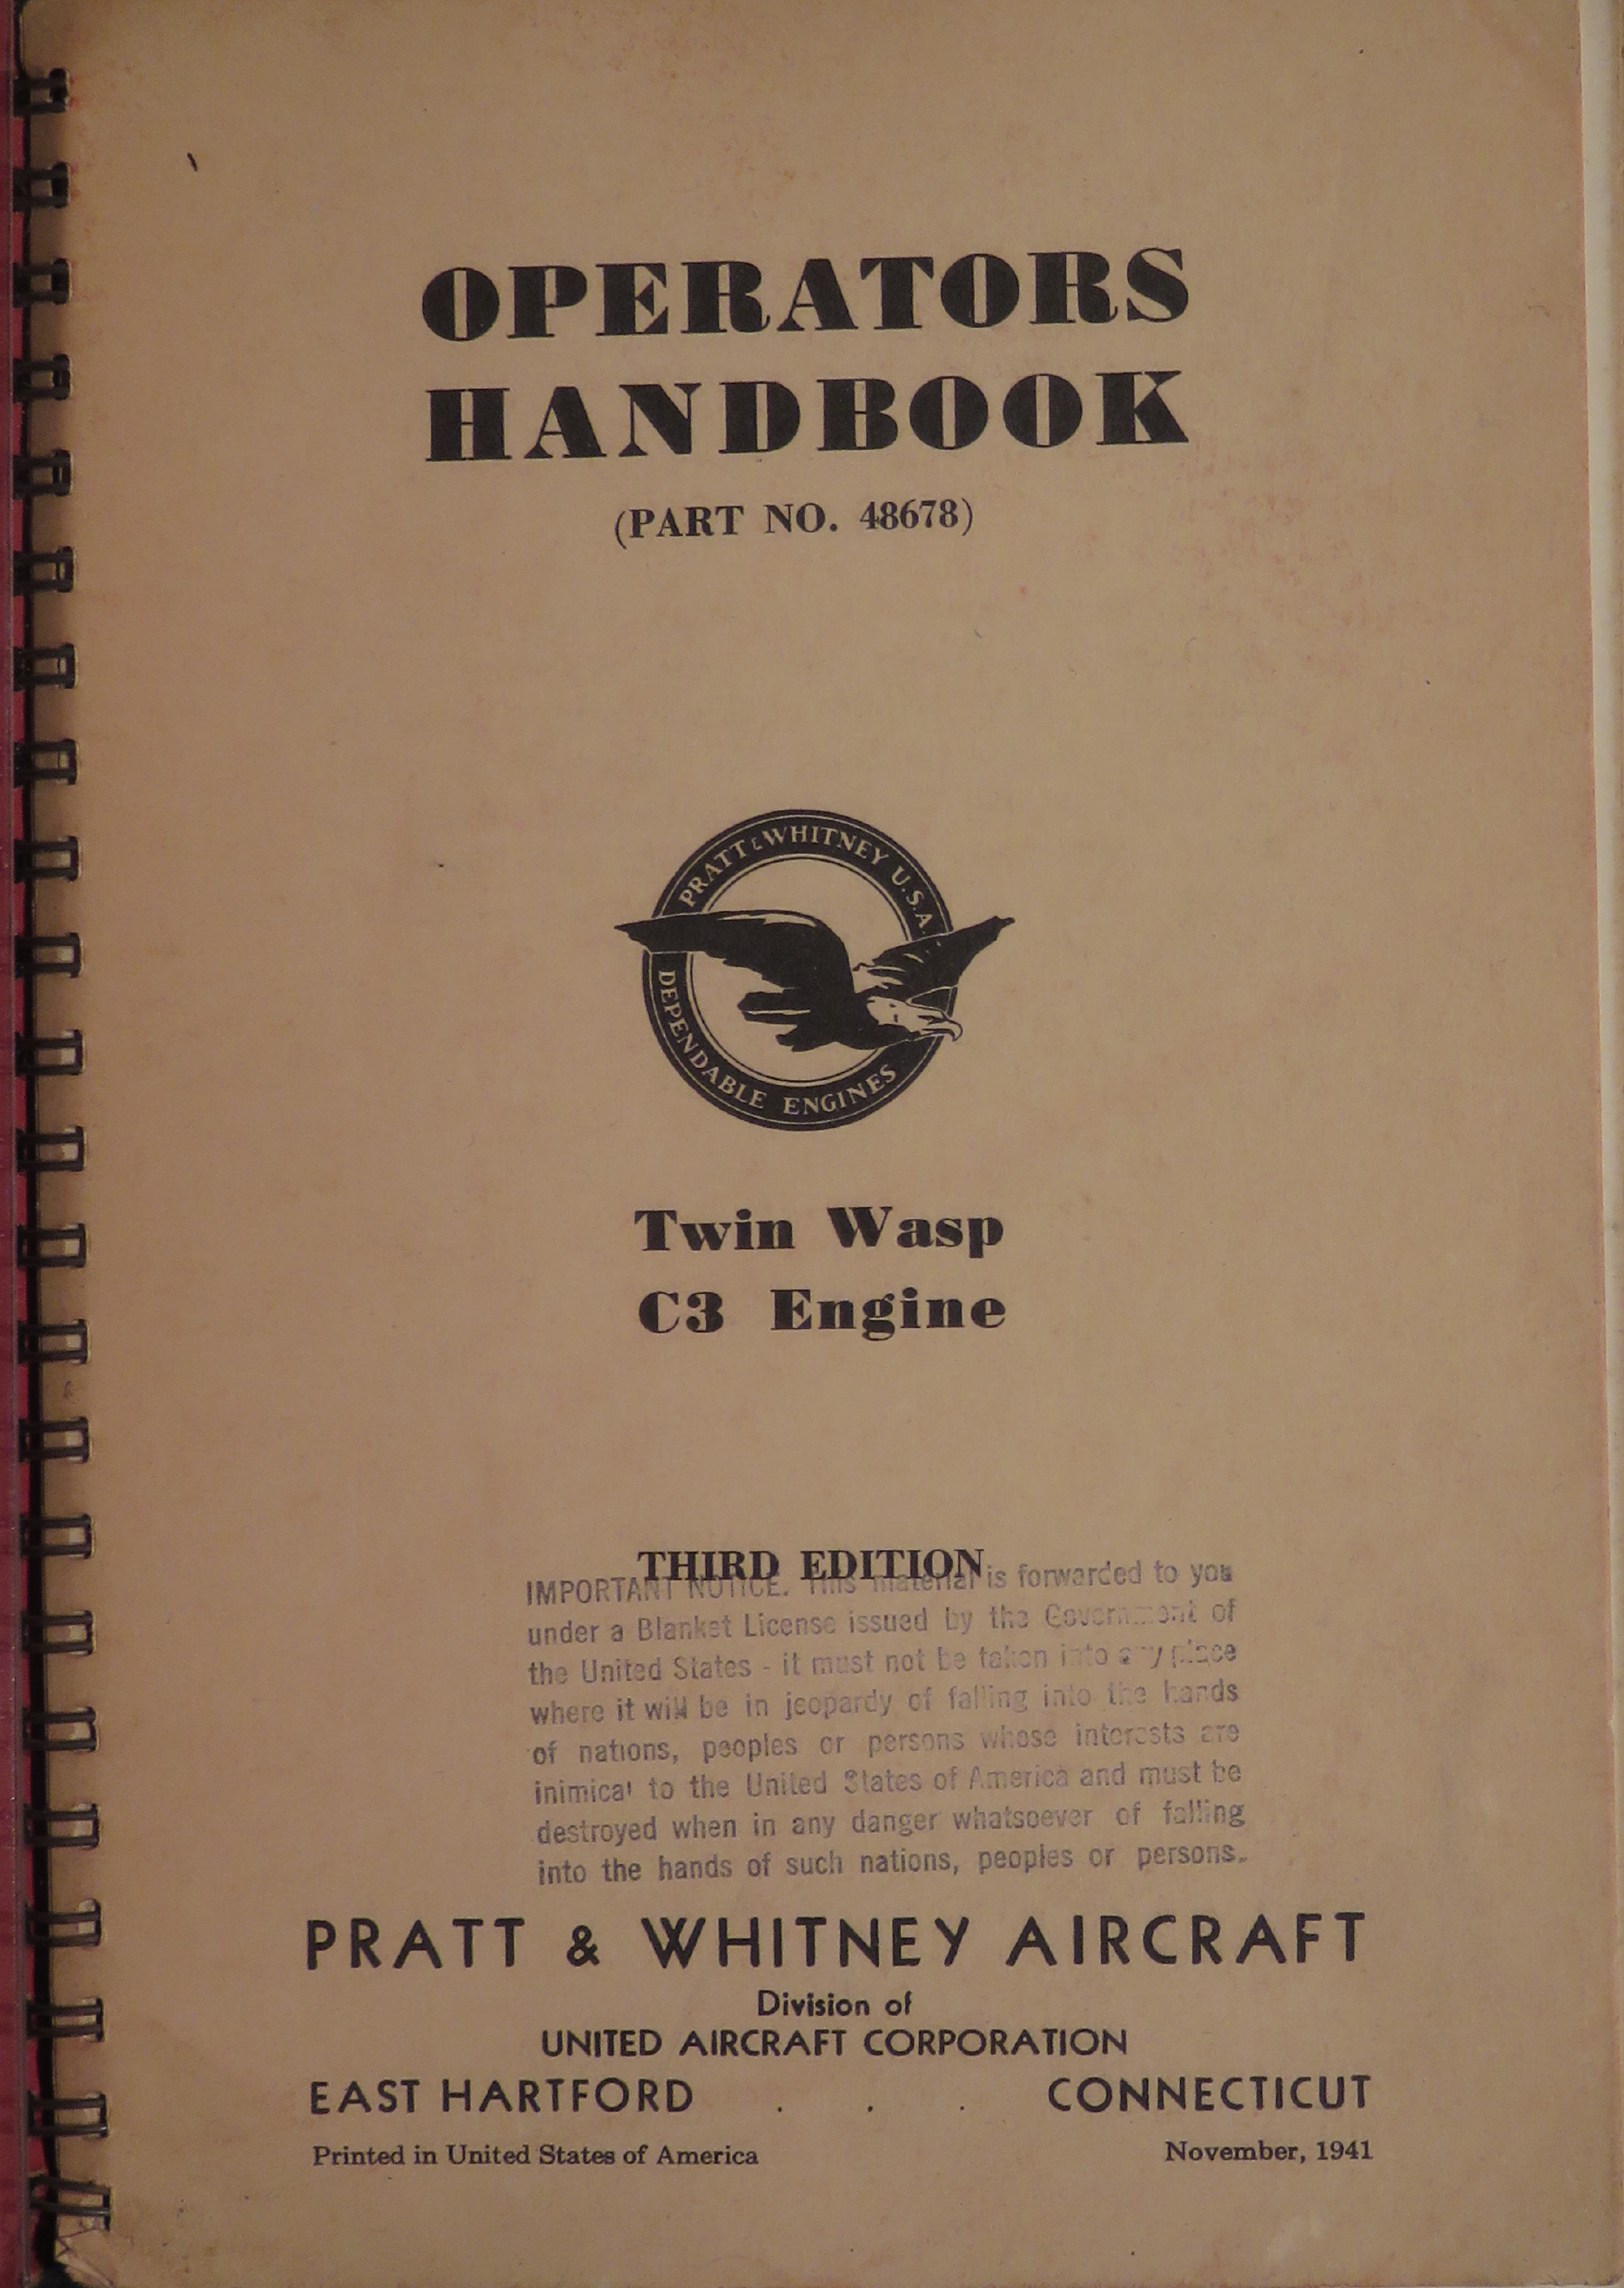 Sample page 3 from AirCorps Library document: Operators Handbook for Twin wasp C3 Series Engines